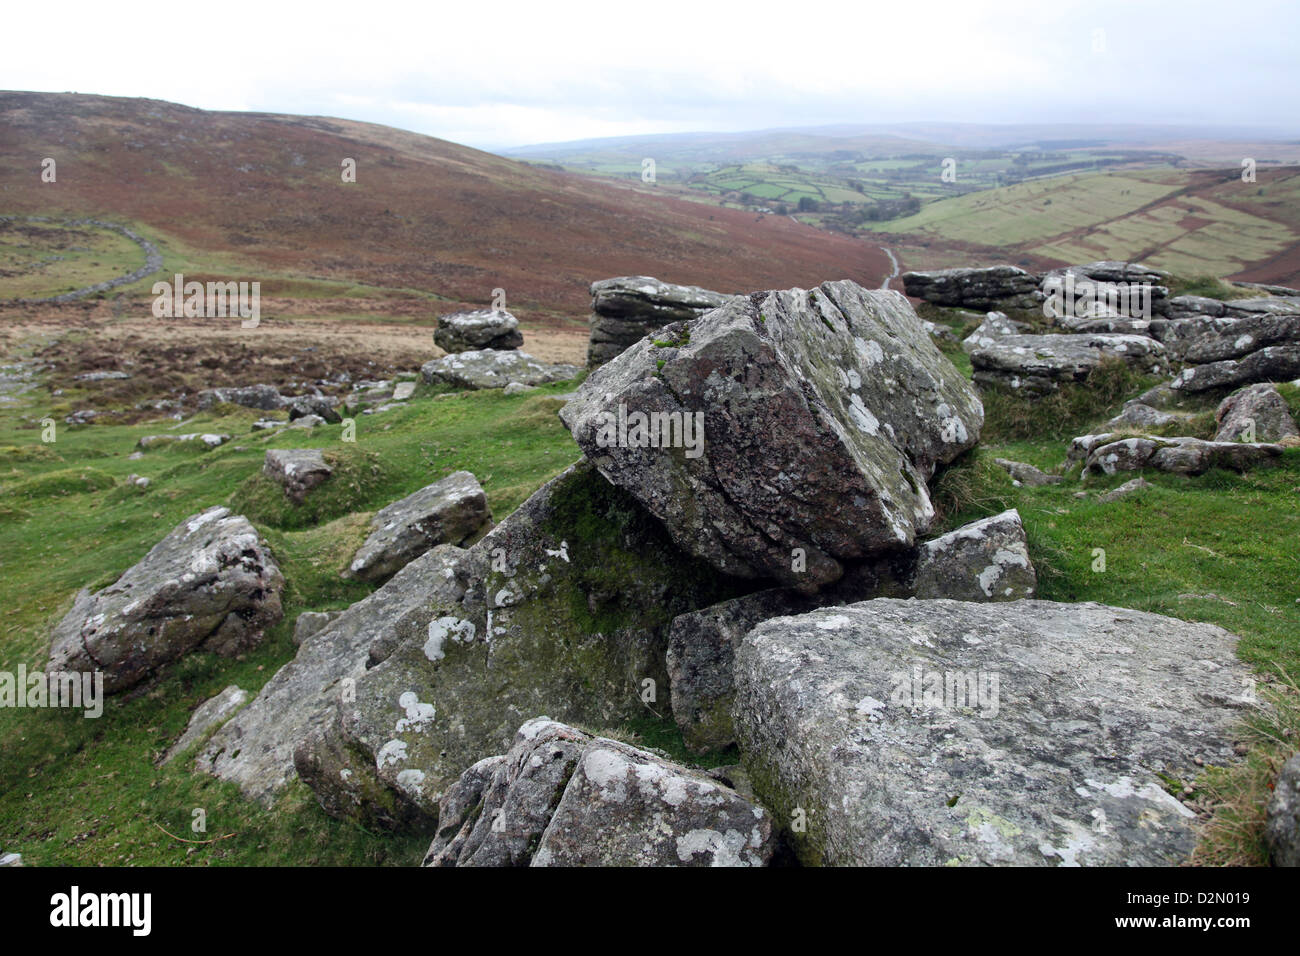 Rocks at the summit of Hookney Tor, looking down the Challacombe valley, Dartmoor, Devon, England, United Kingdom, Europe Stock Photo